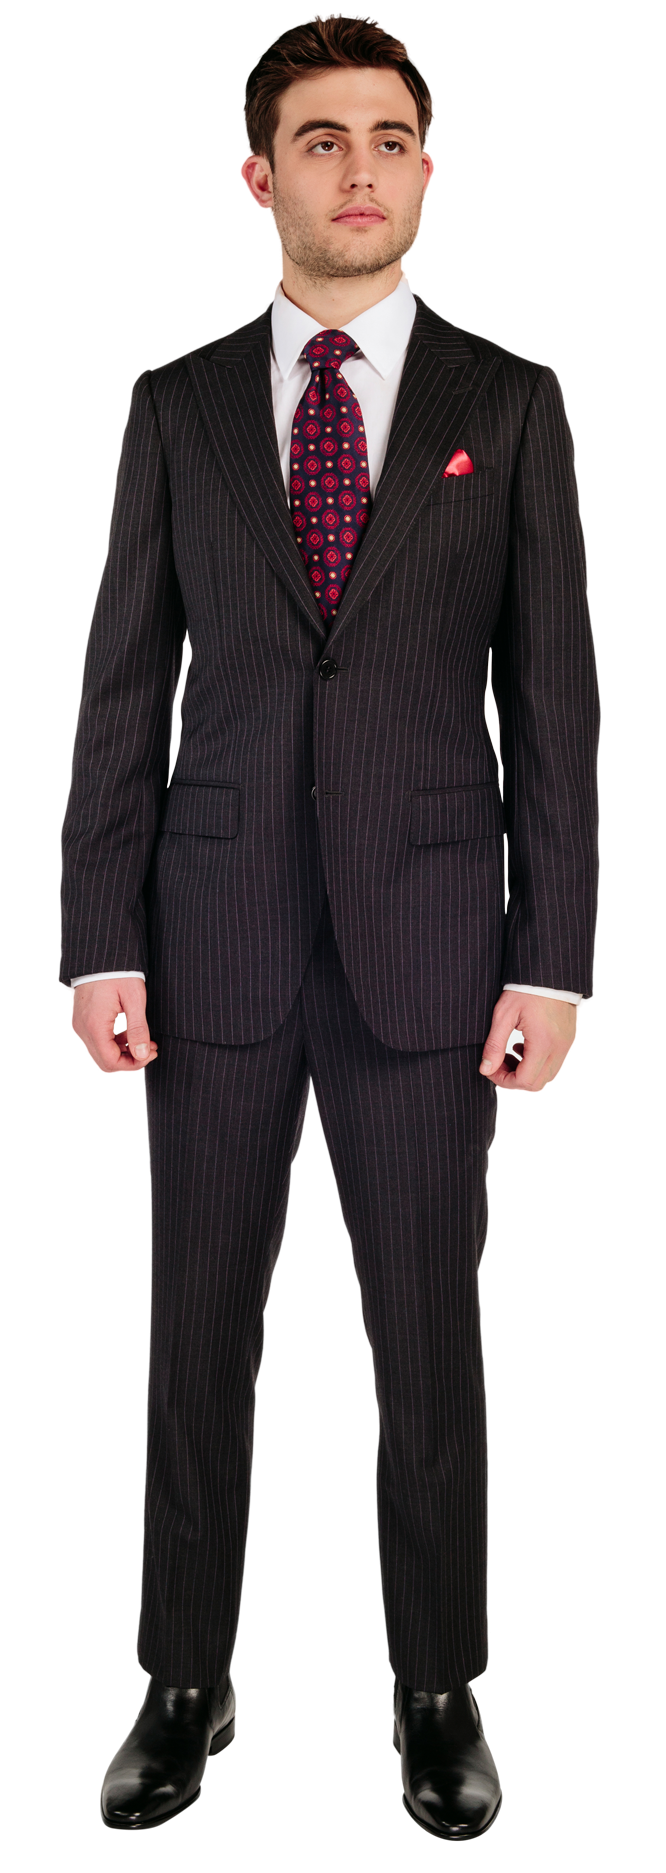 Guy in a png. Suit clipart groom suit